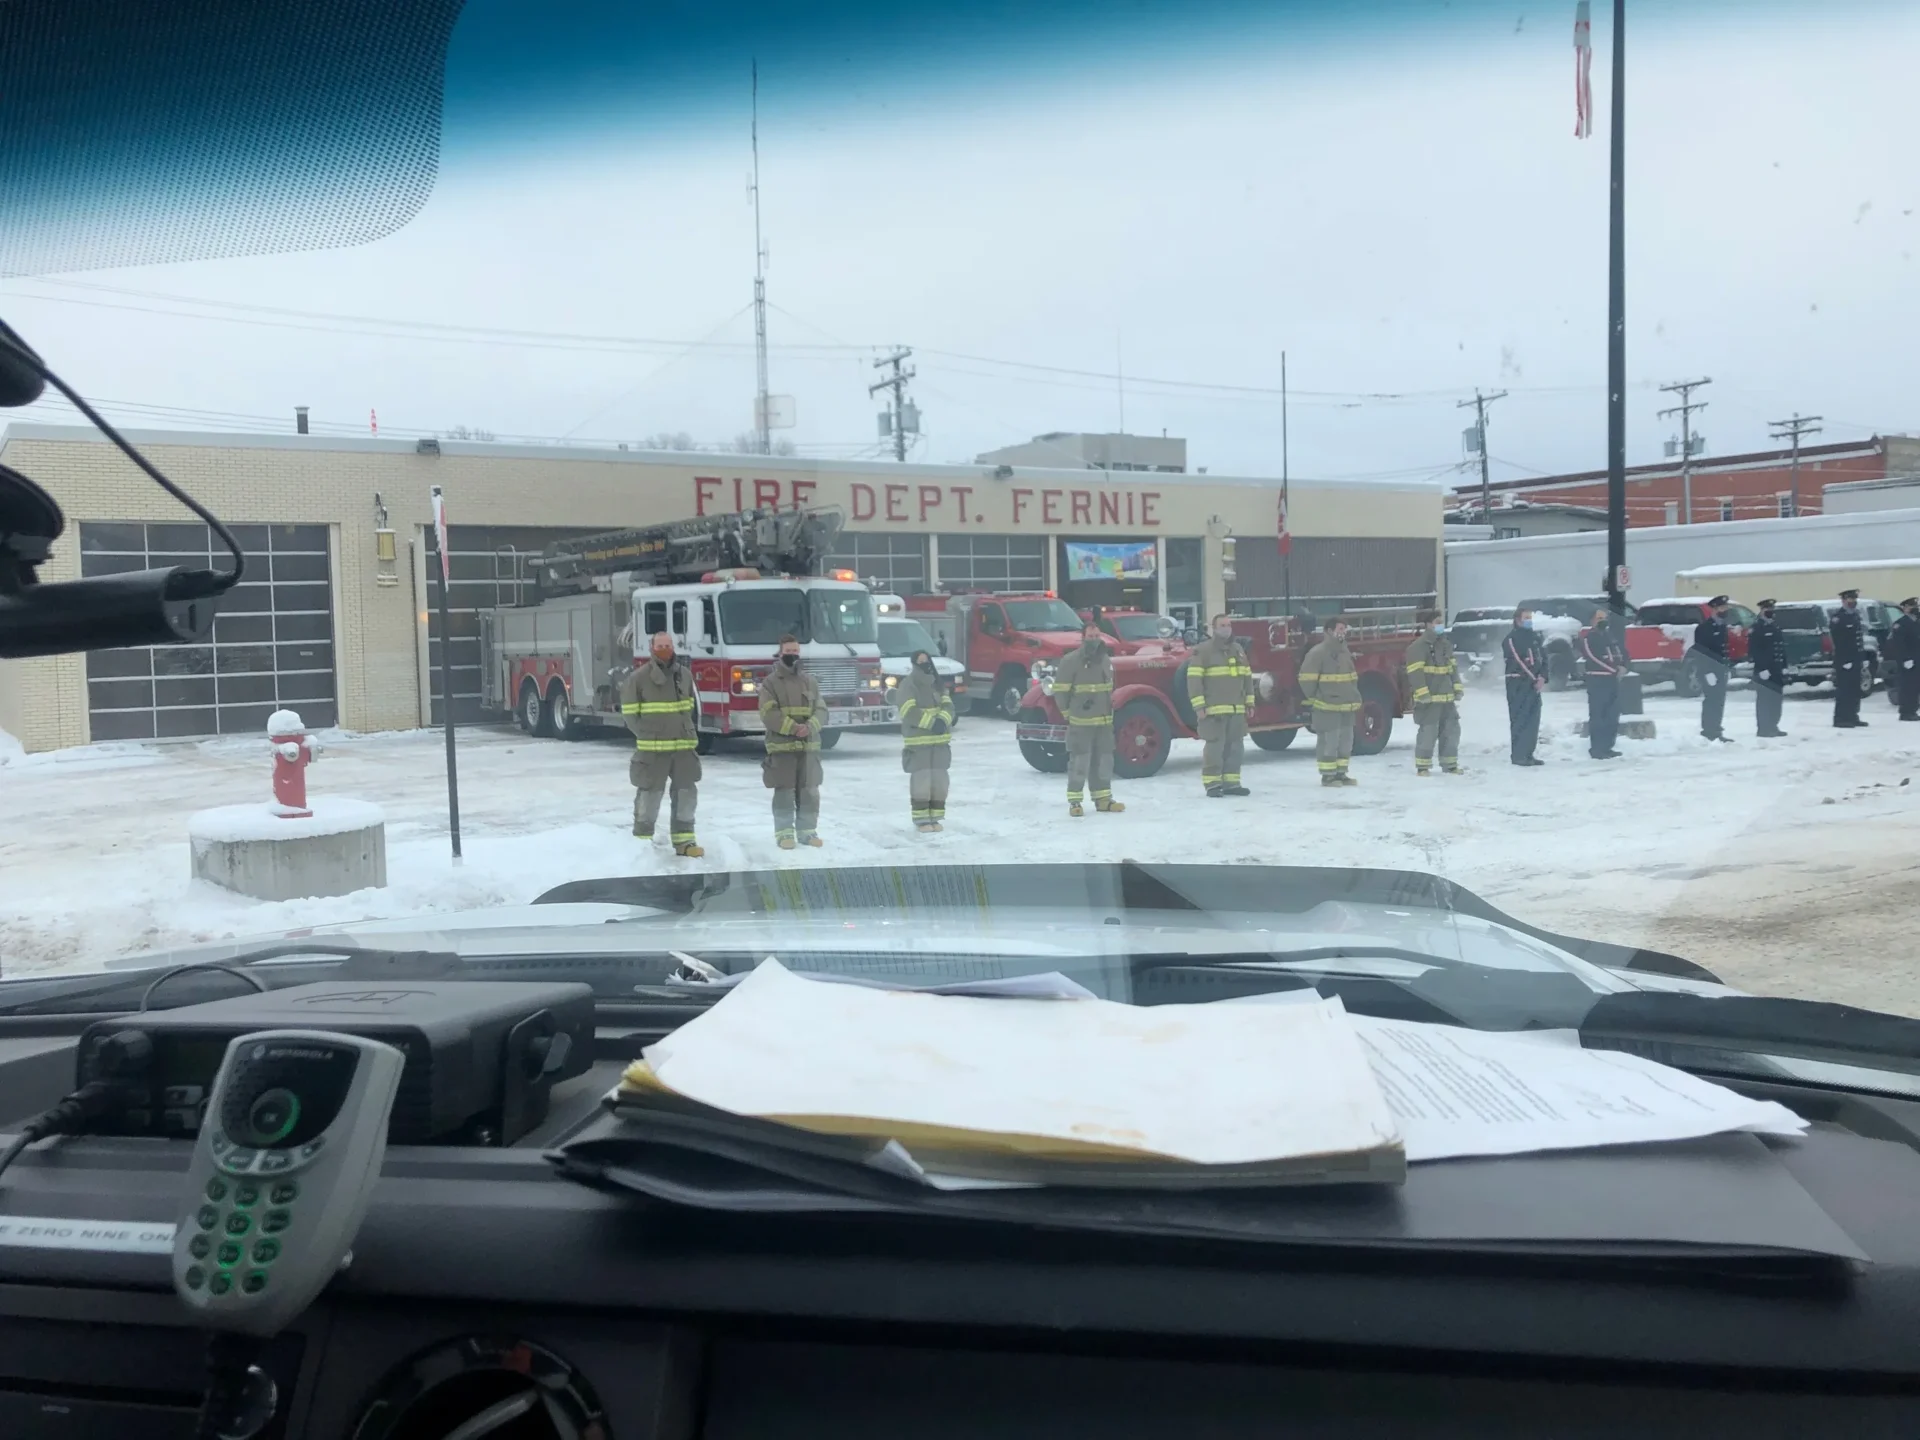 A group of firemen standing in front of a fire station.